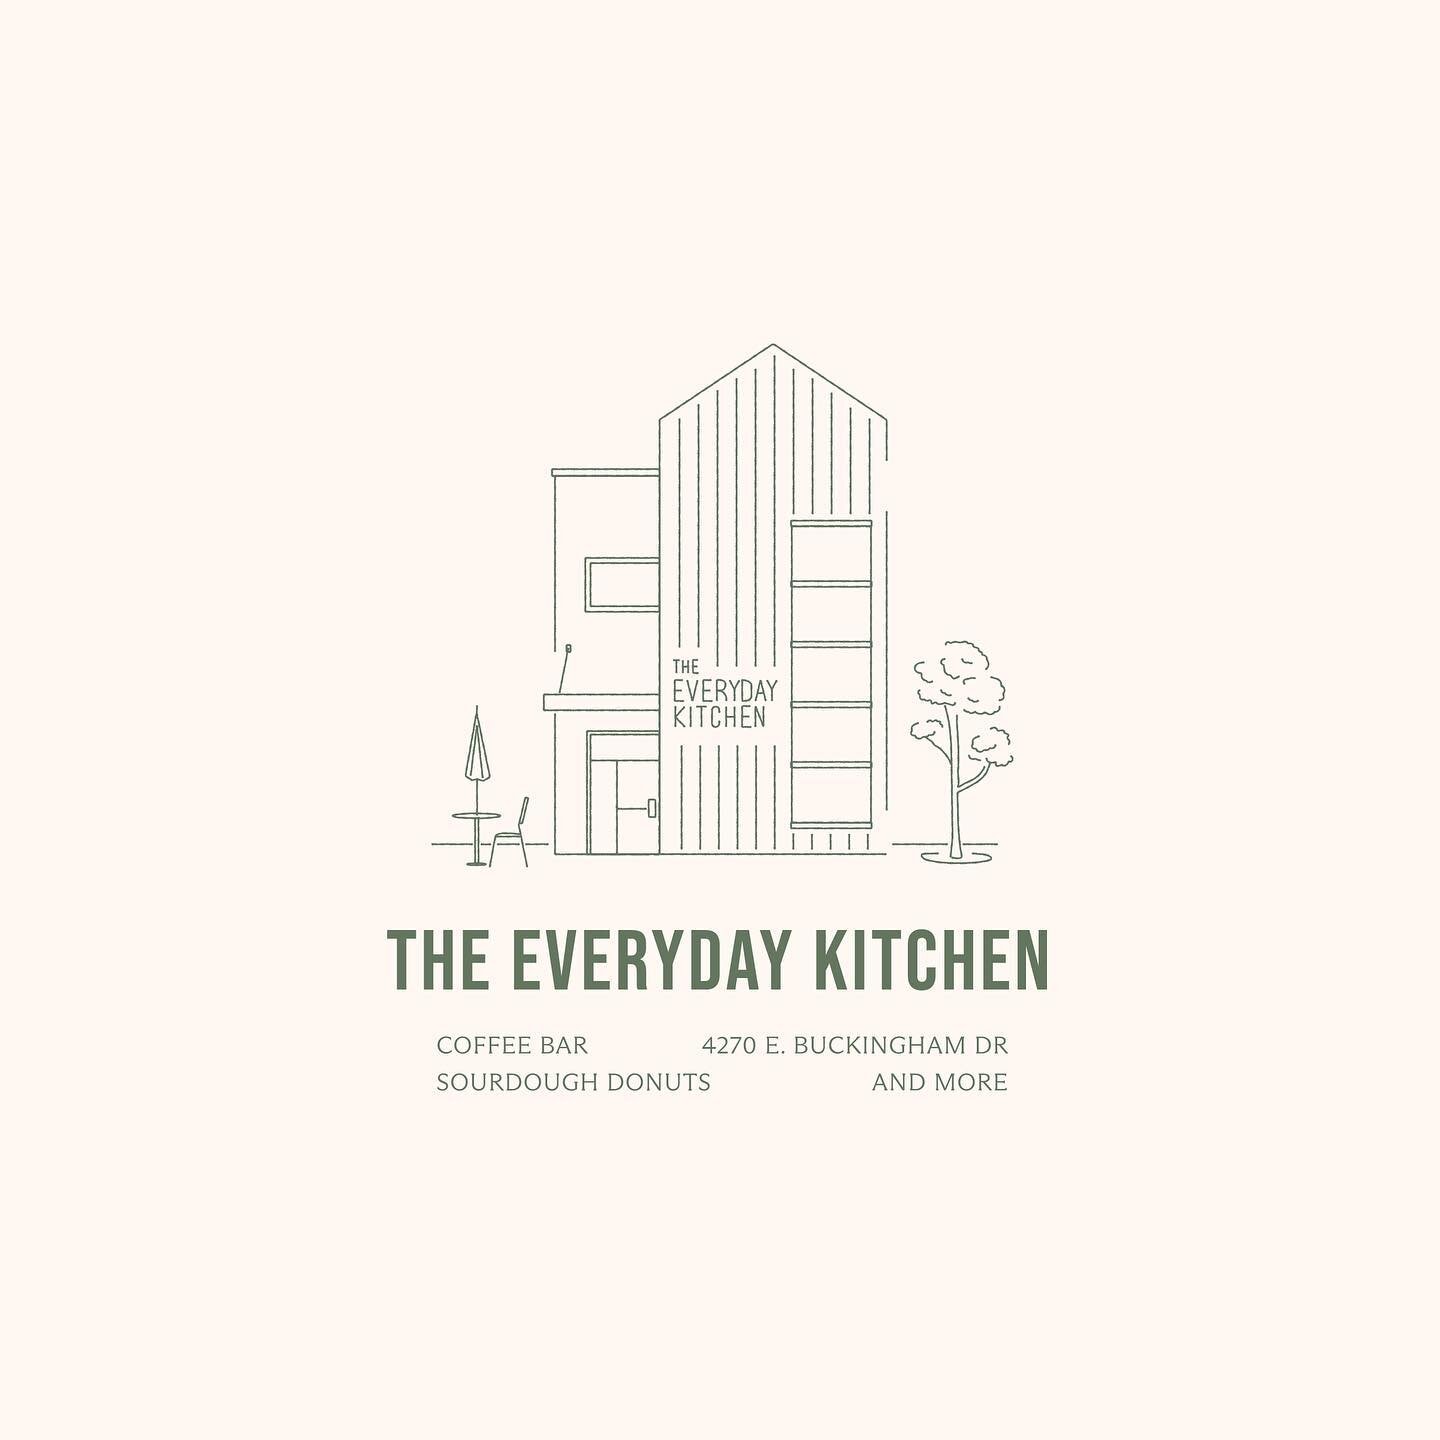 We are in the throngs of working with our exceptional friends at @theeverydaykitchen on their brand expansion. The final product looks equally as lovely but sharing these illo concepts that never made it past round 1 so they could live permanently on